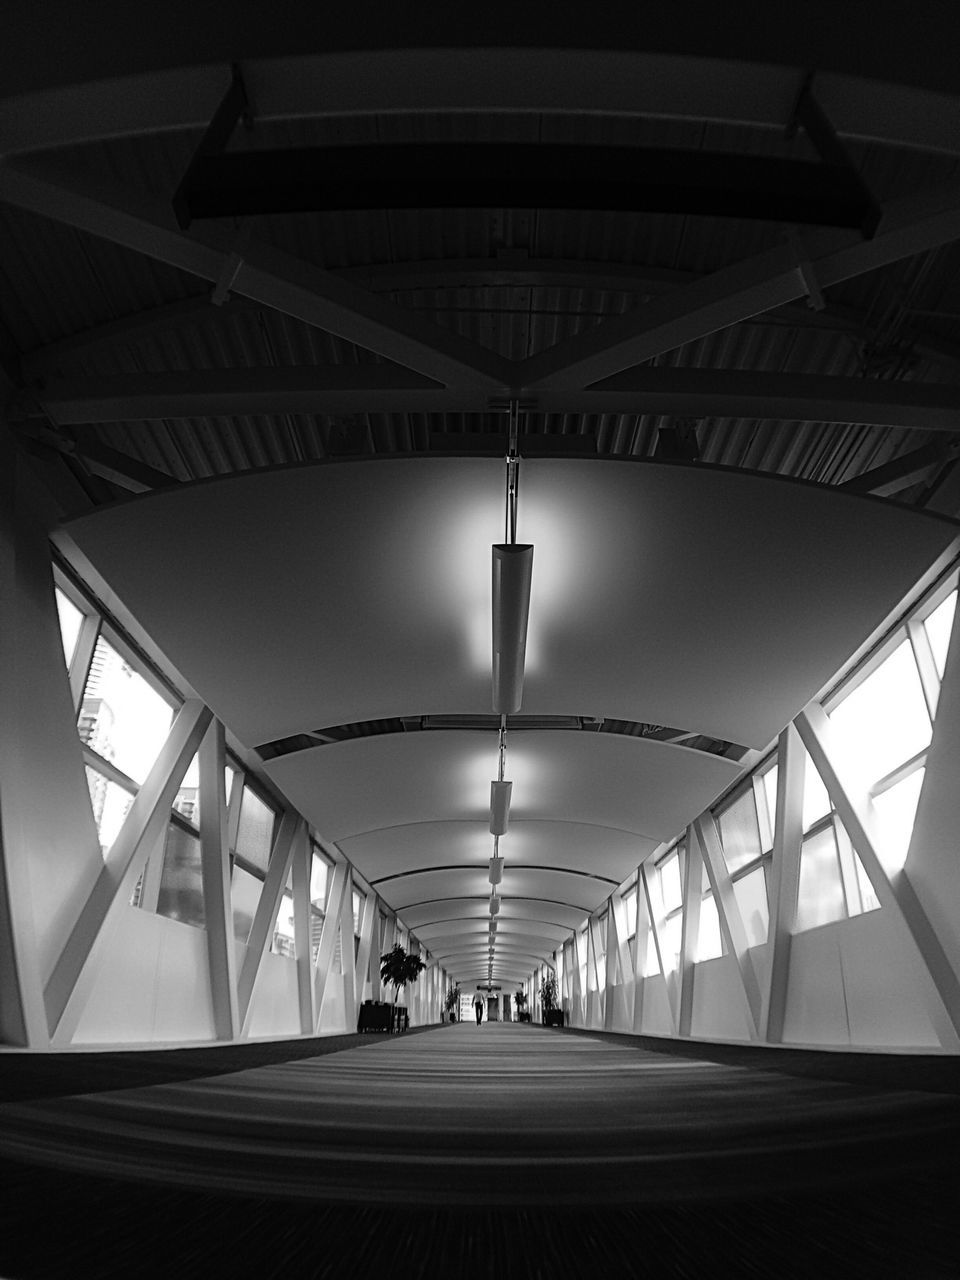 indoors, ceiling, architecture, built structure, illuminated, lighting equipment, diminishing perspective, the way forward, low angle view, modern, vanishing point, in a row, incidental people, corridor, electric light, empty, connection, transportation, hanging, no people